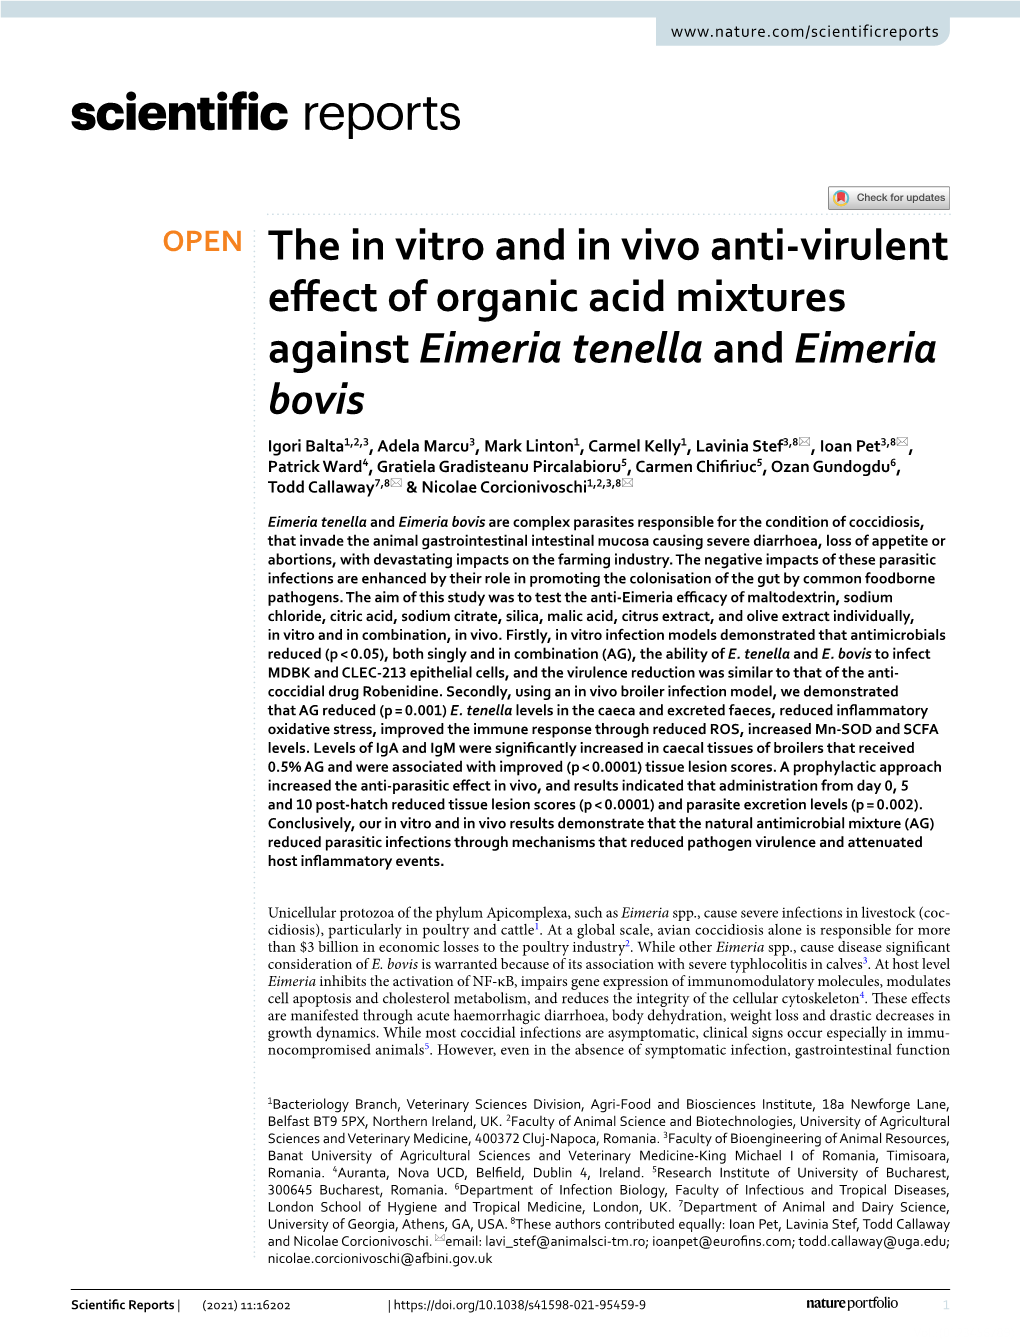 The in Vitro and in Vivo Anti-Virulent Effect of Organic Acid Mixtures